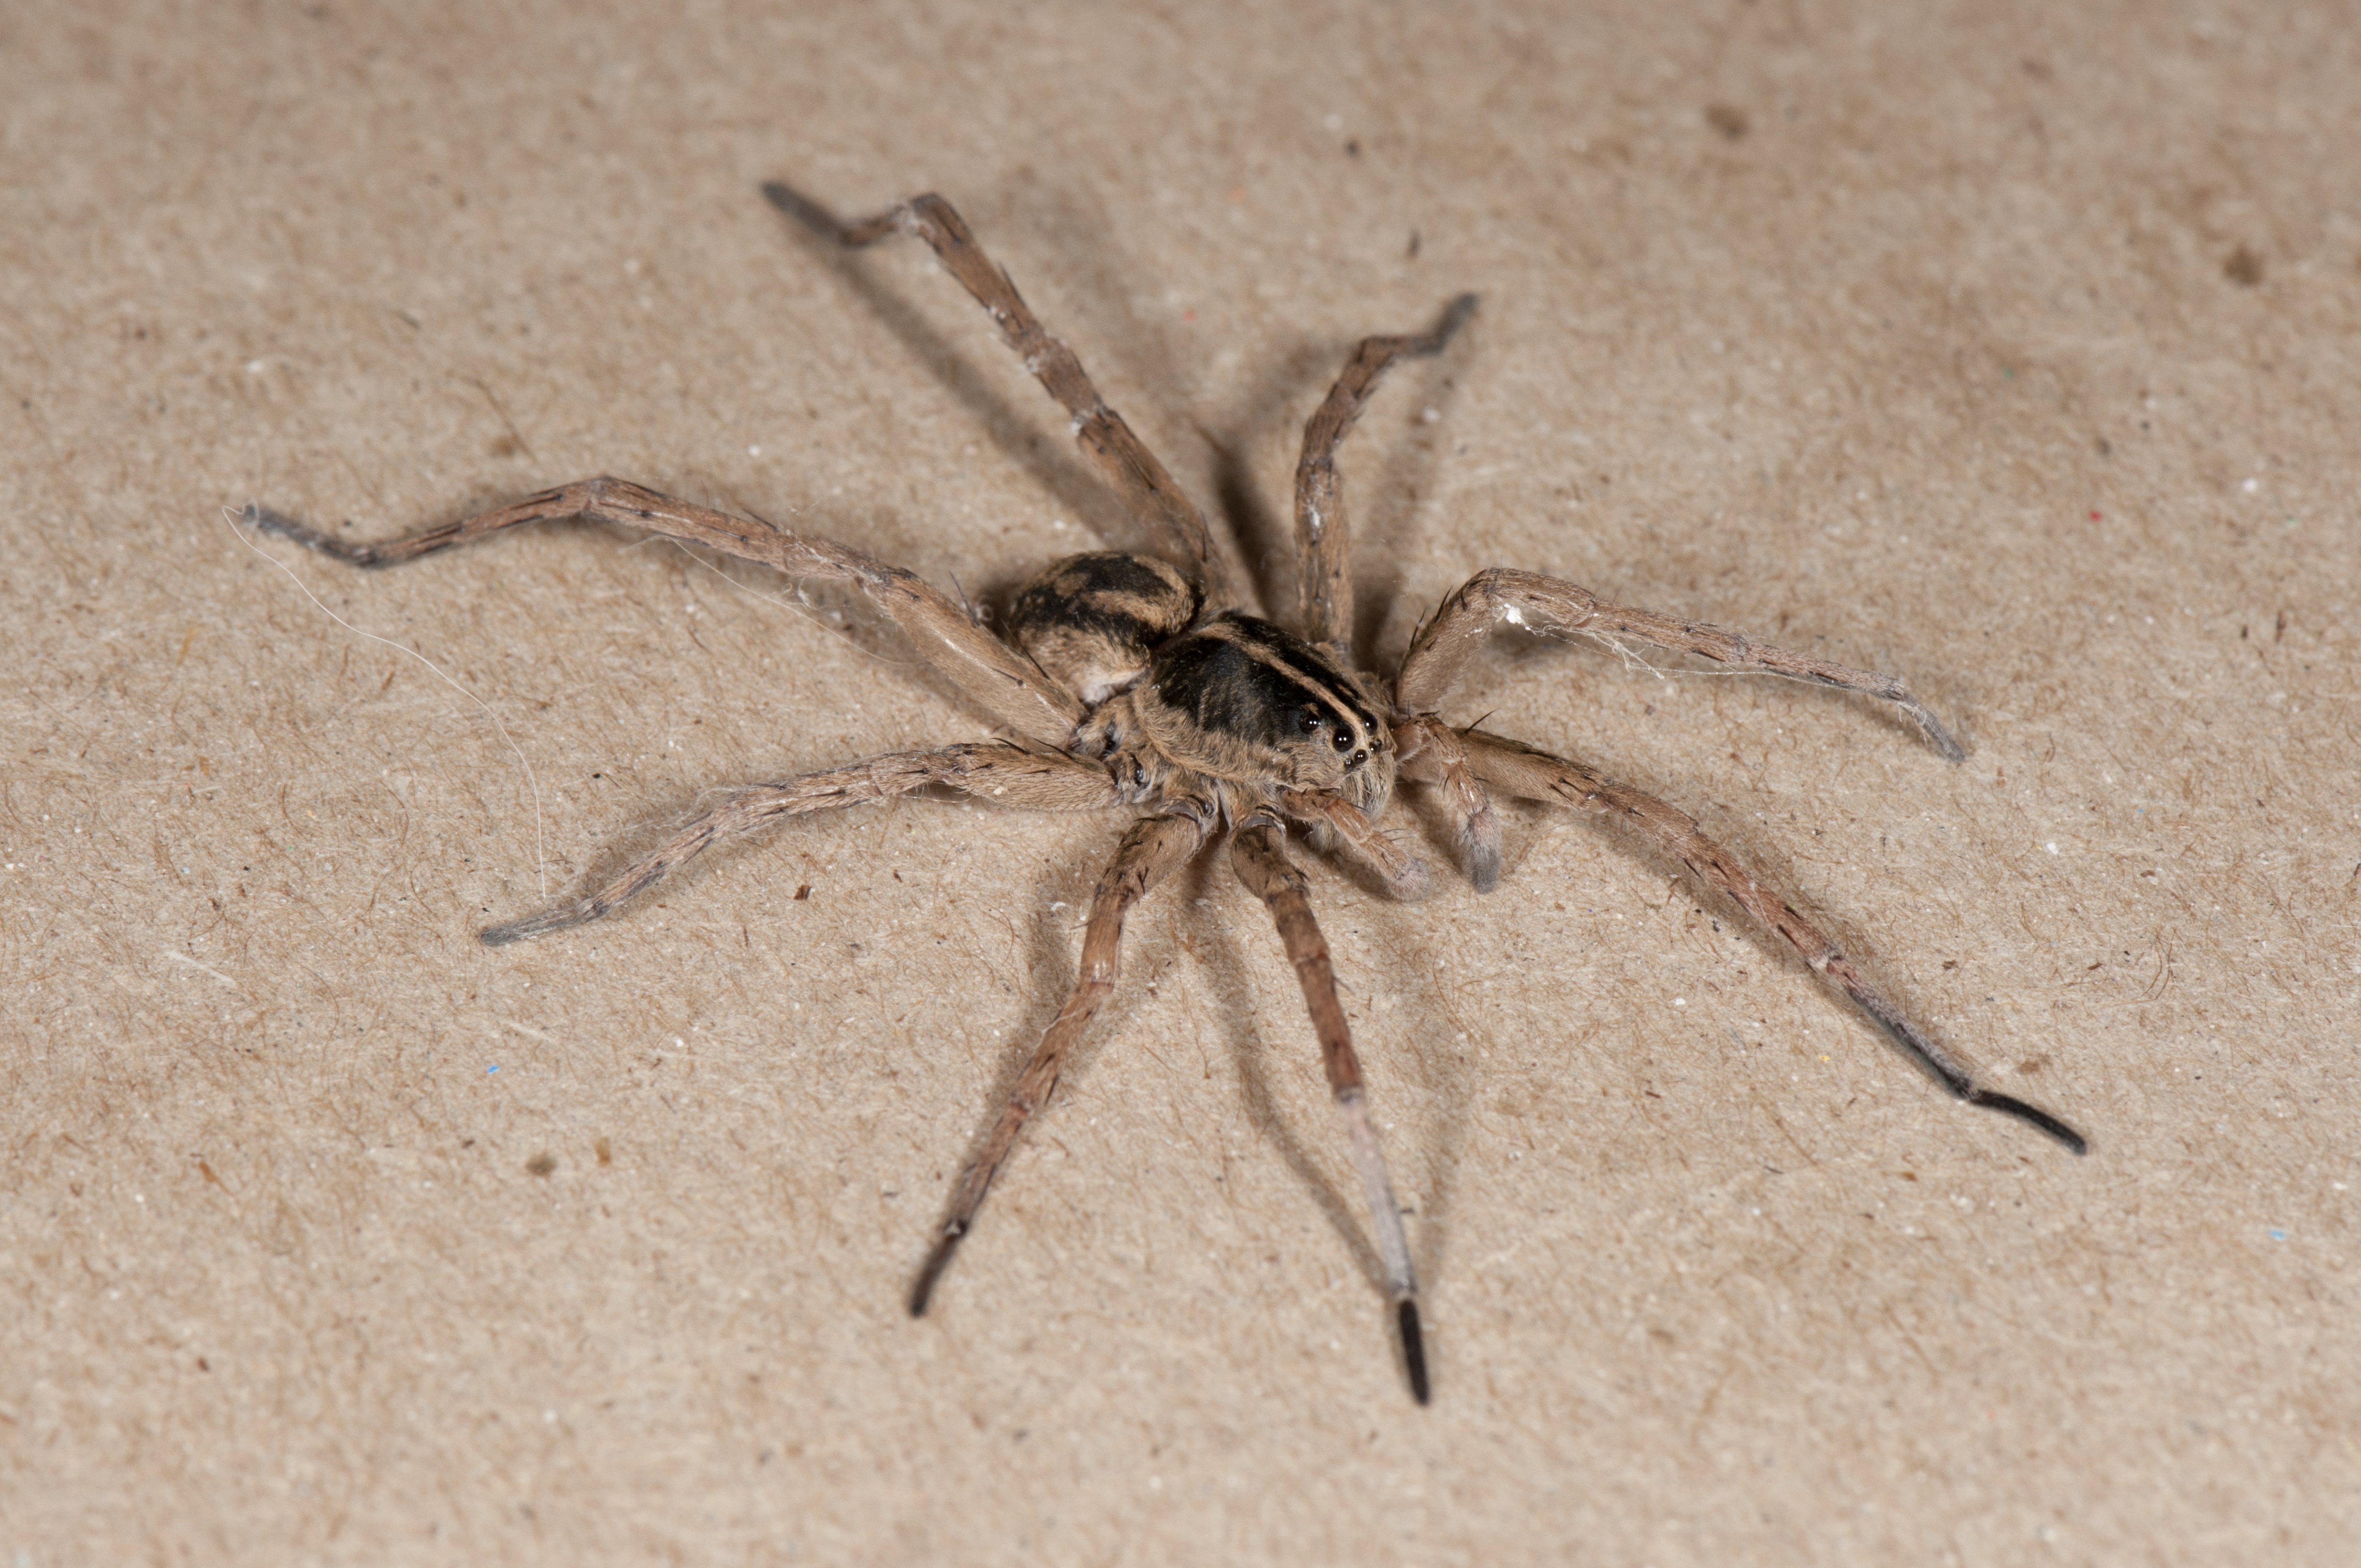 big and scary spiders | spidersrule